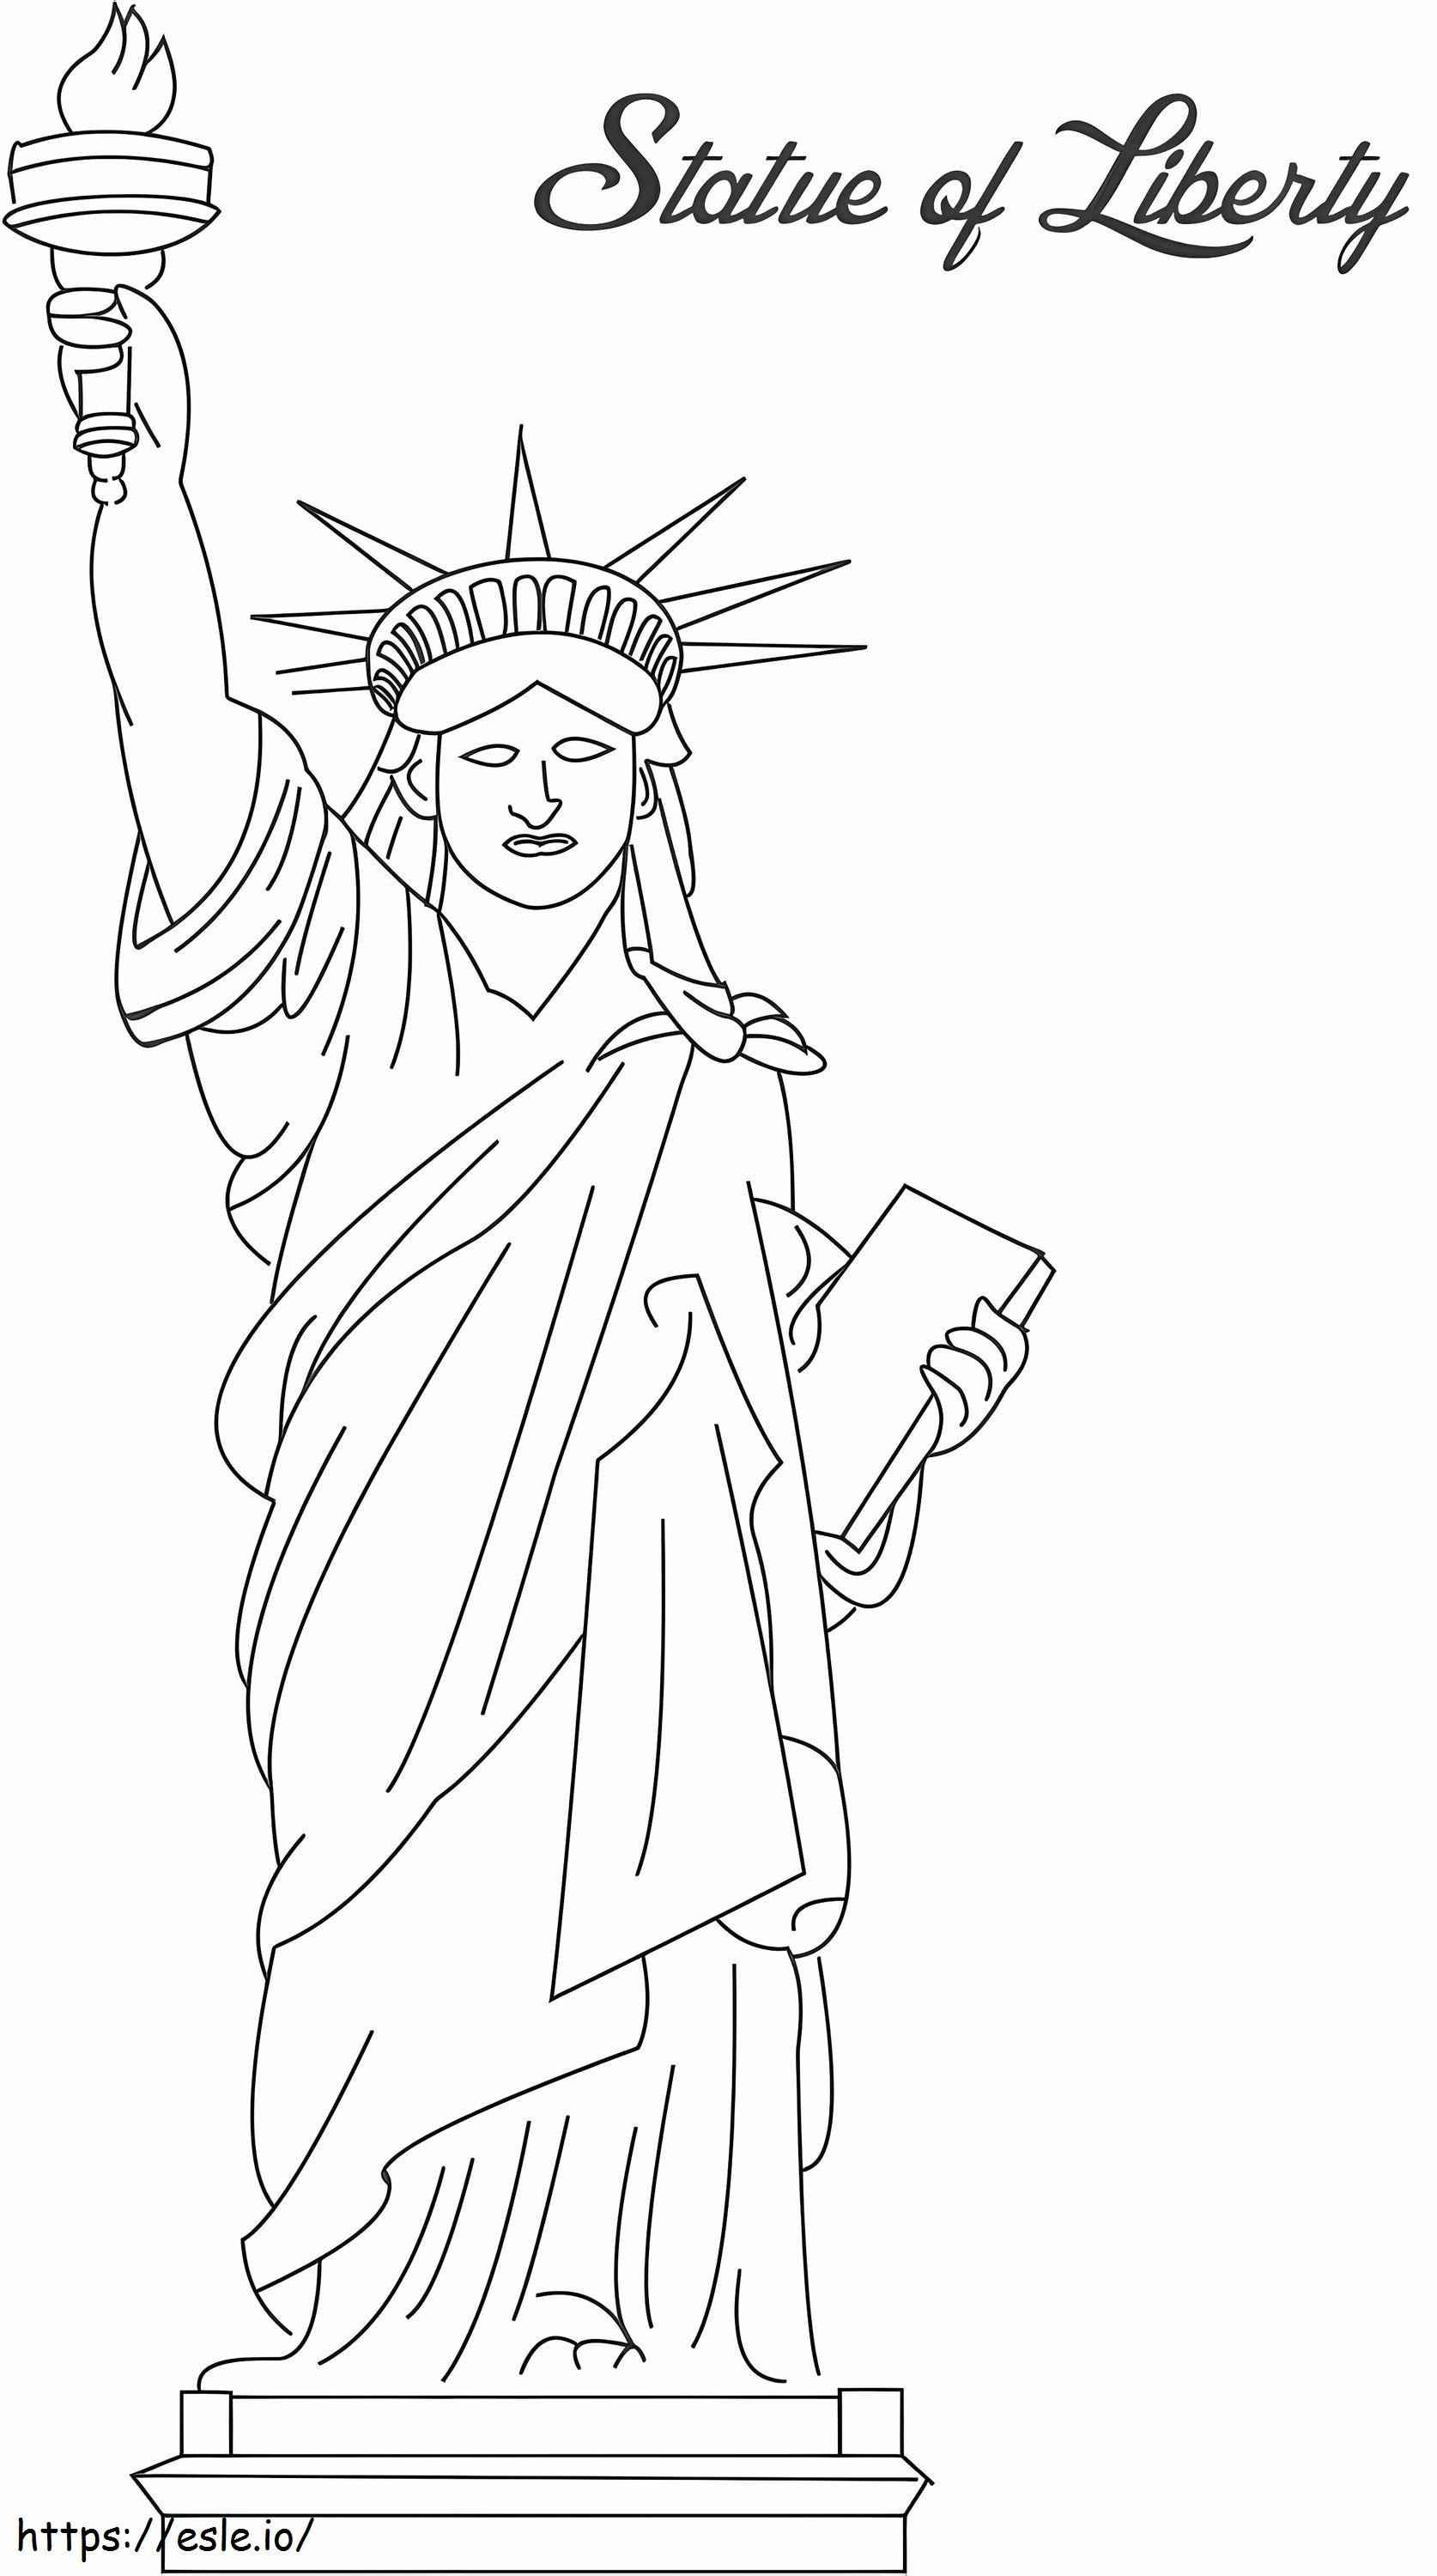 1526317223 3350 29314 Statue Of Liberty coloring page